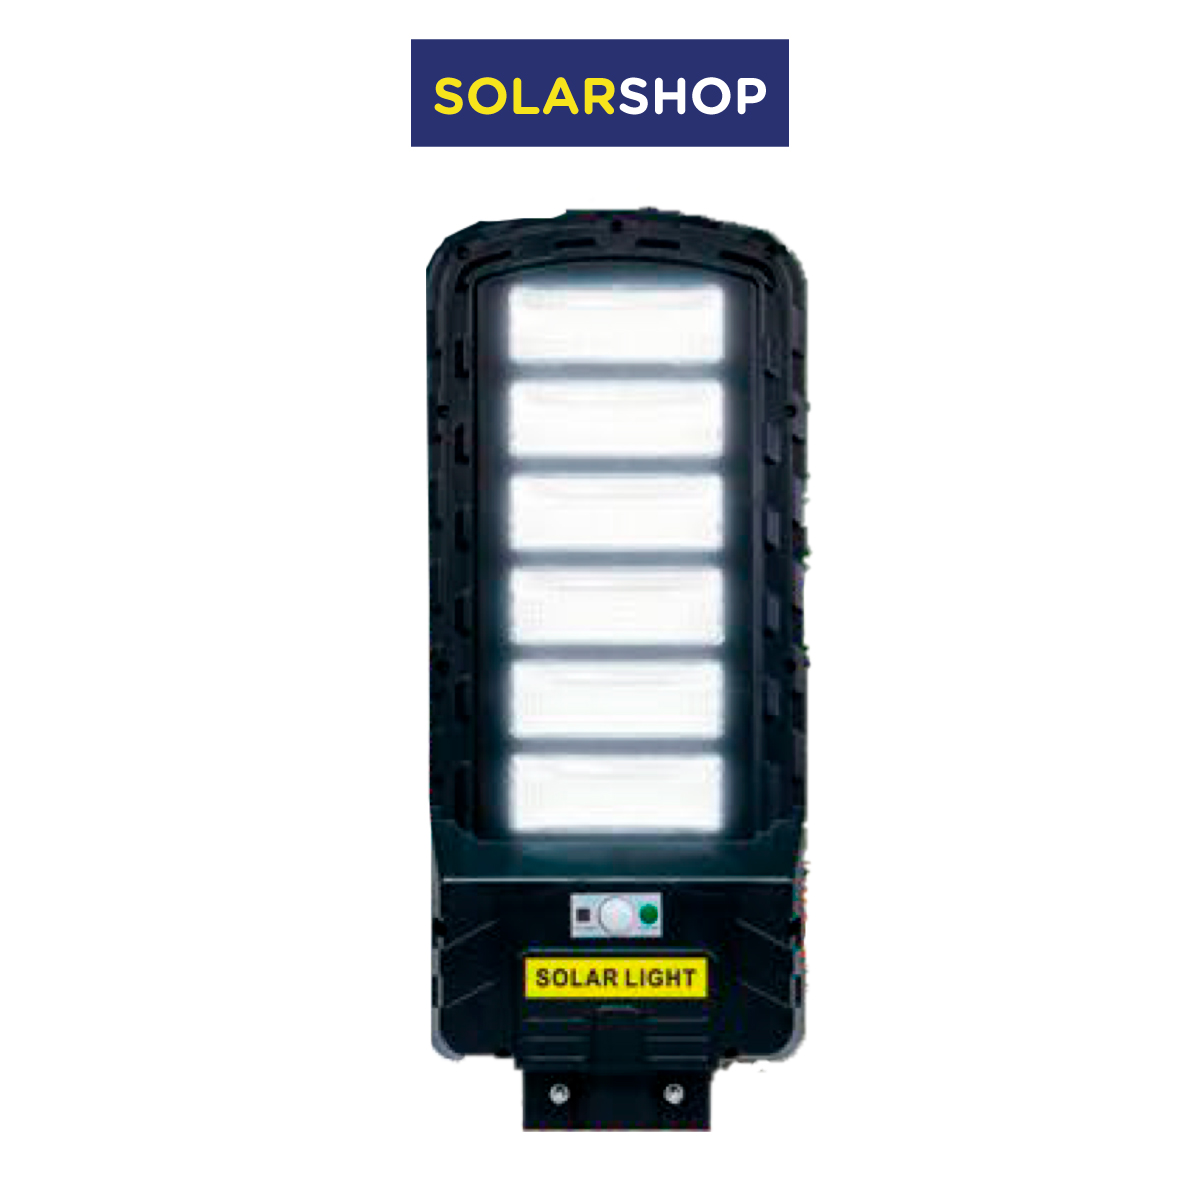 ANTORCHA SOLAR LED x1 🔥🌞 – Carrito Express Colombia